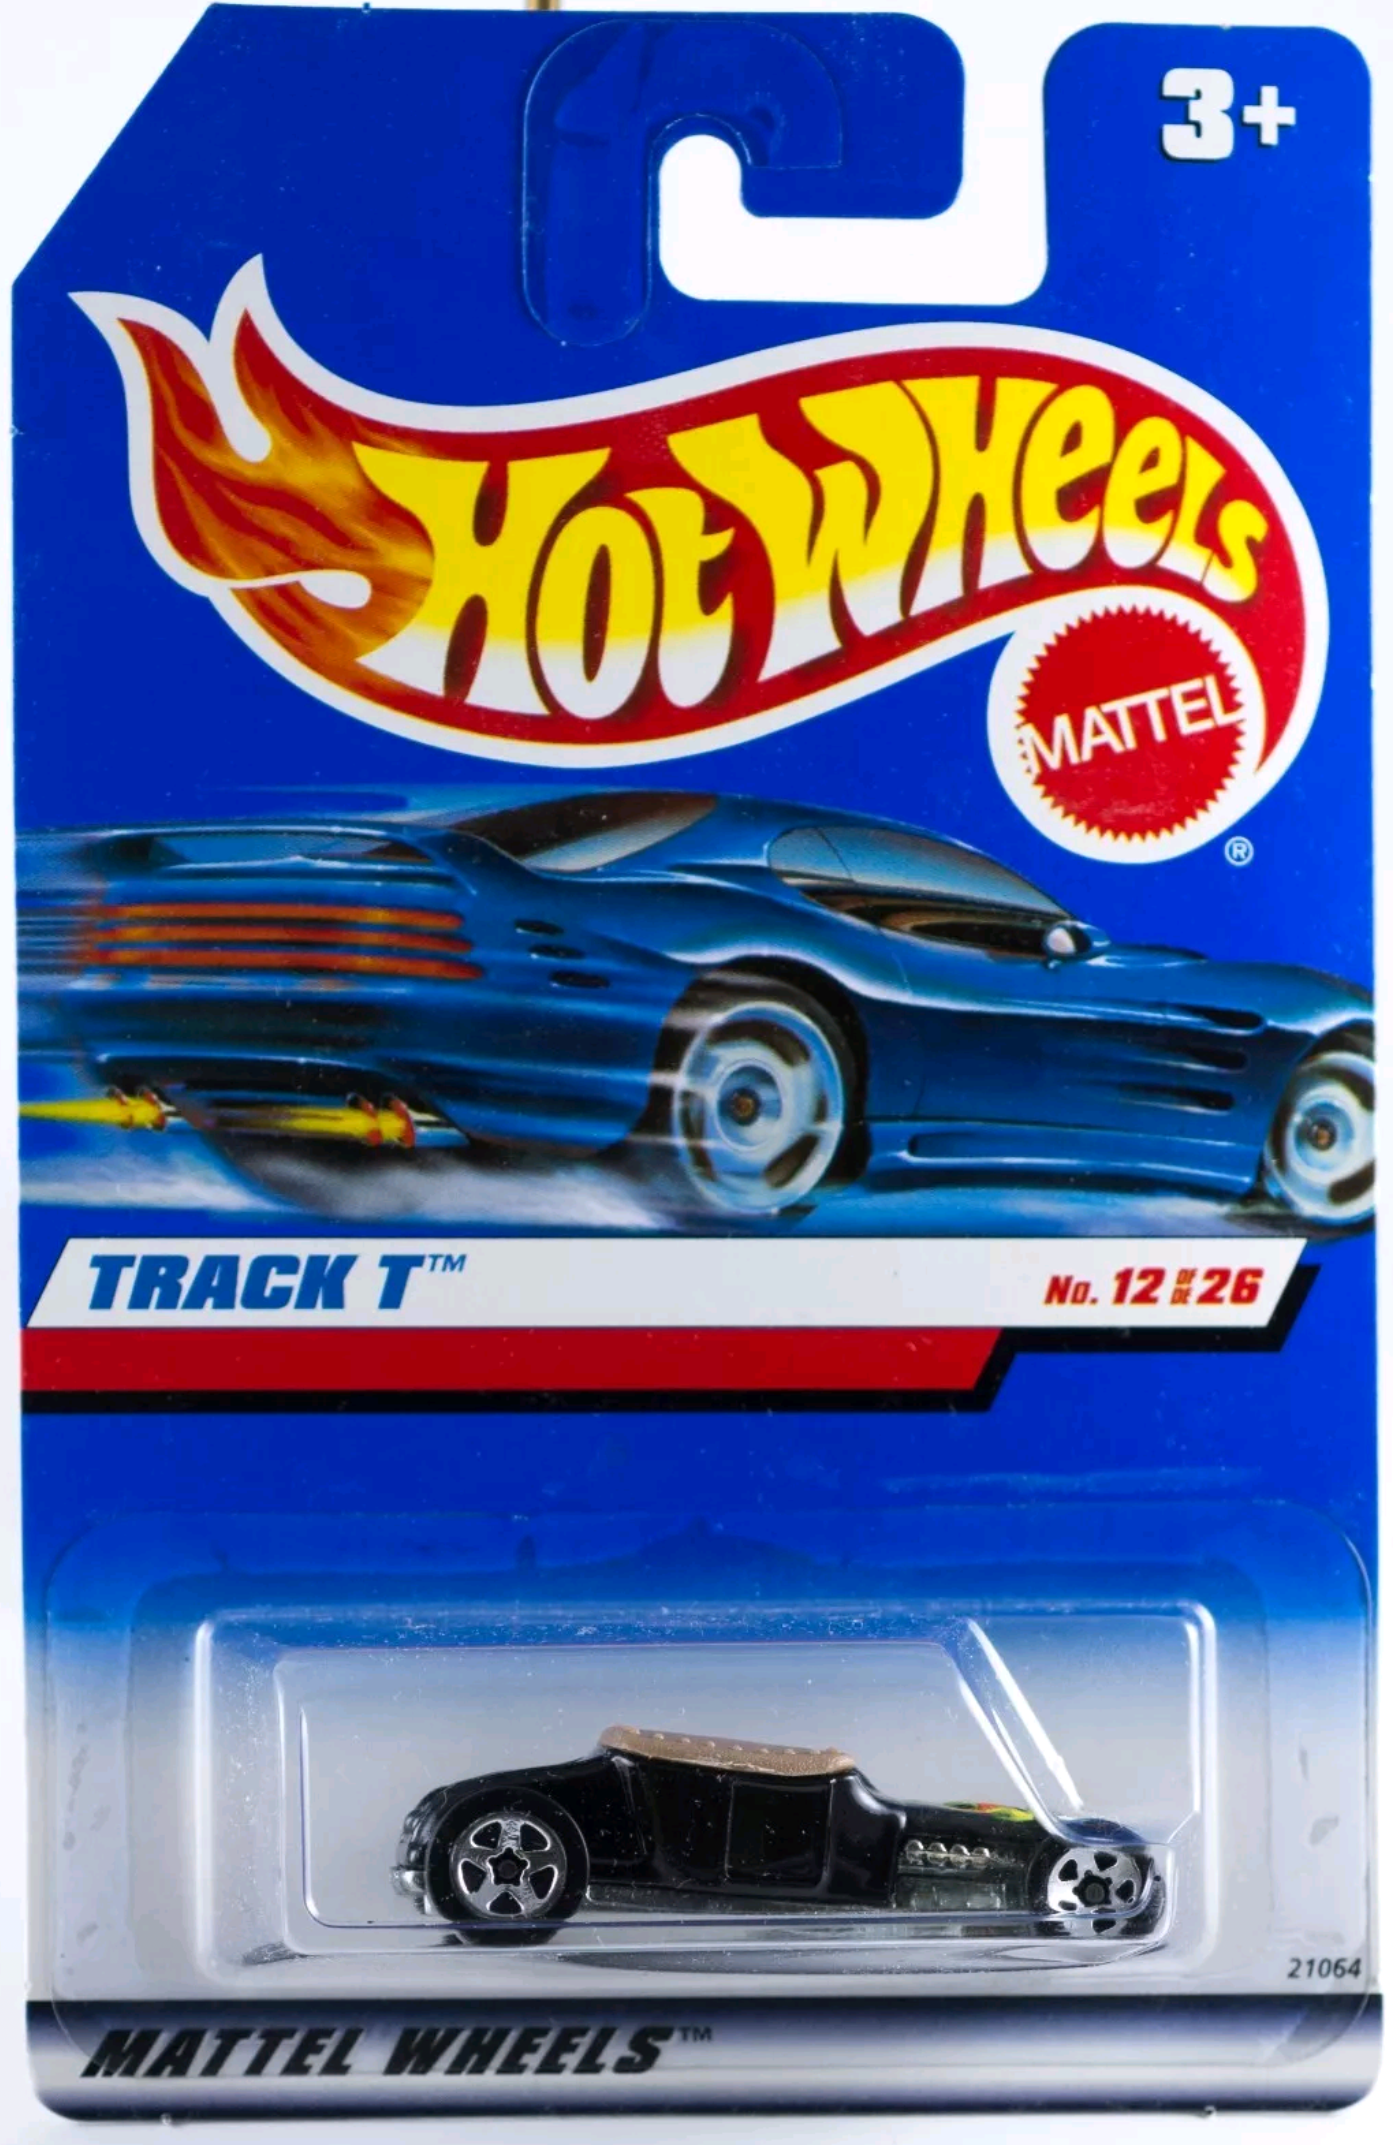 Hot Wheels 1999 - (USA Collector # 917) - First Editions 12/26 - Track T - Black - IC